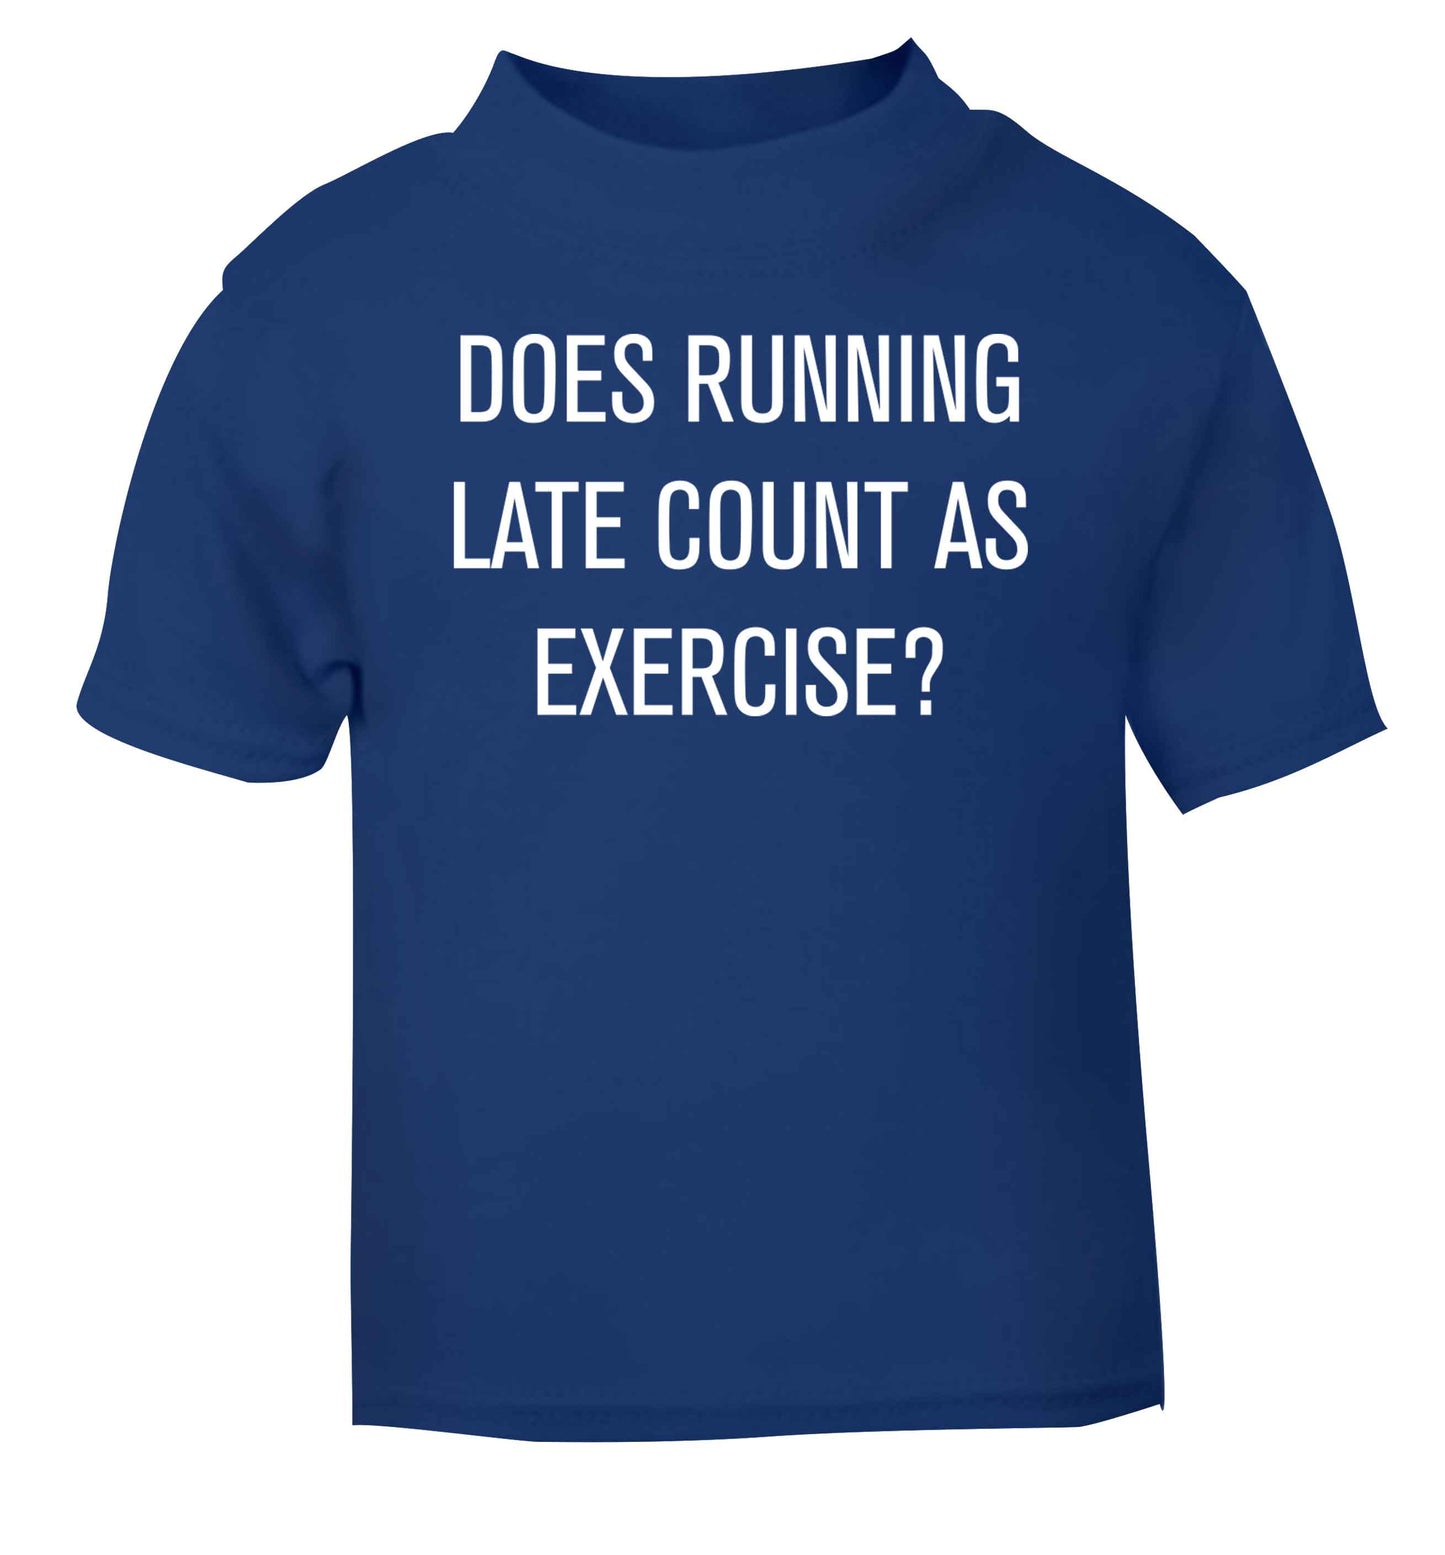 Does running late count as exercise? blue baby toddler Tshirt 2 Years